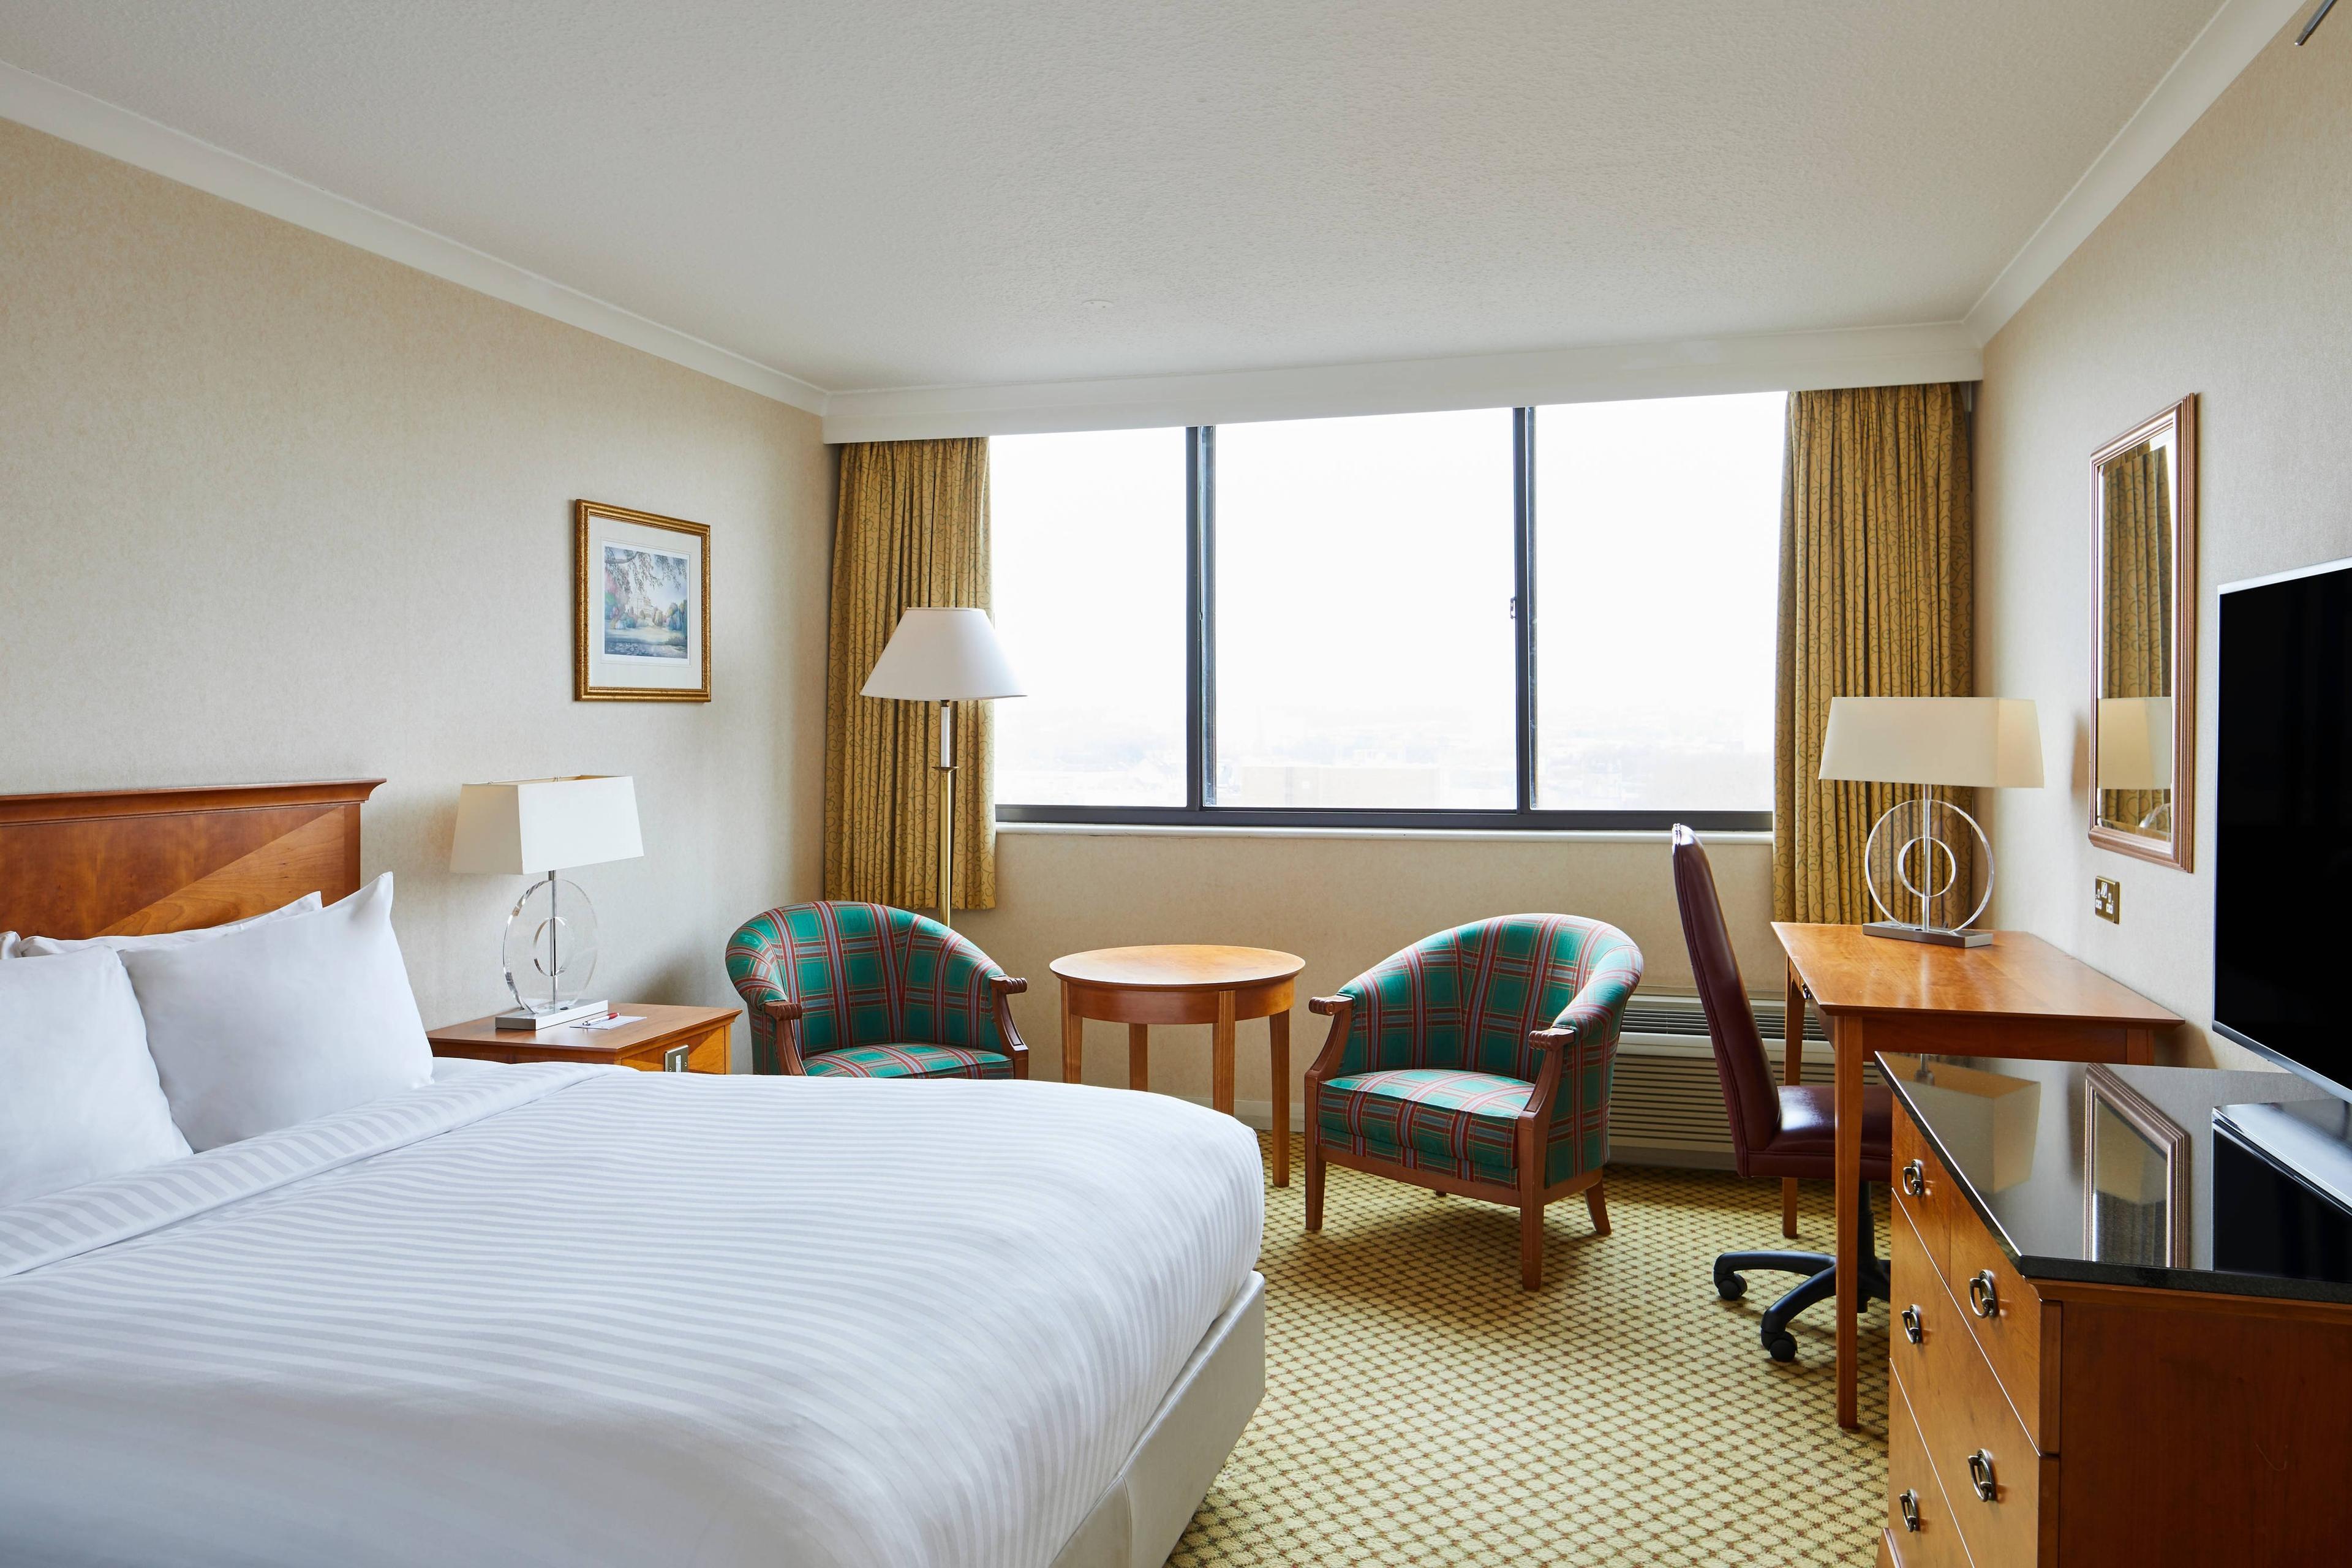 We offer room service and premium bath products in our double deluxe guest room.